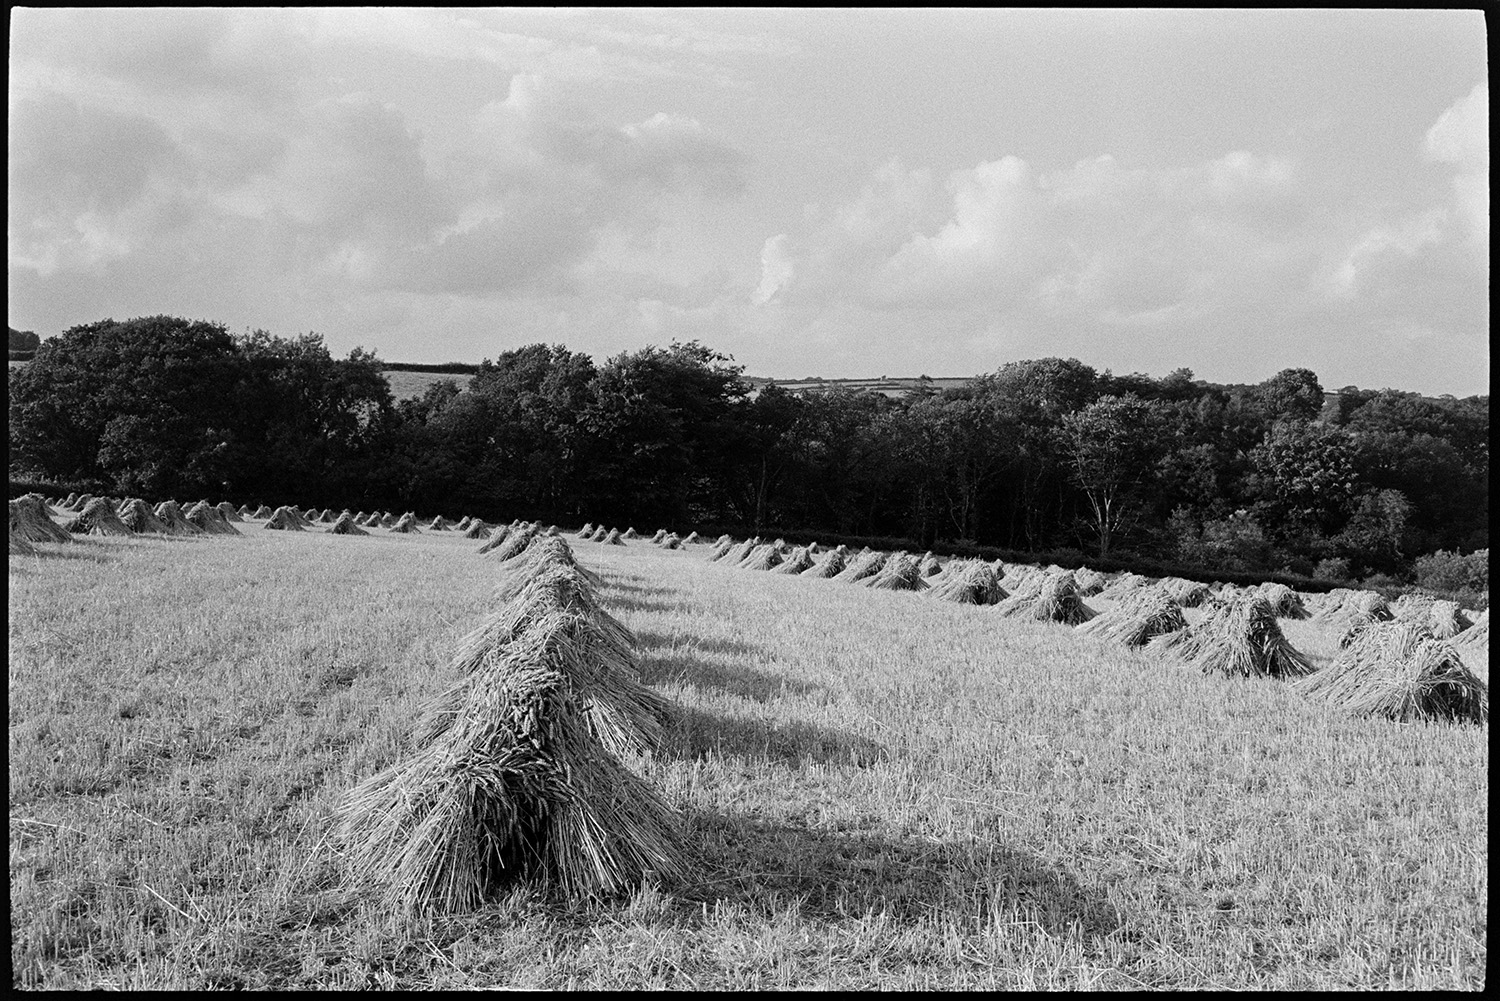 Cloudy landscape, corn stooks with shadows, rainbow. 
[Stooks of corn in a field at East Westacott, Riddlecombe. Trees can be seen in the background.]